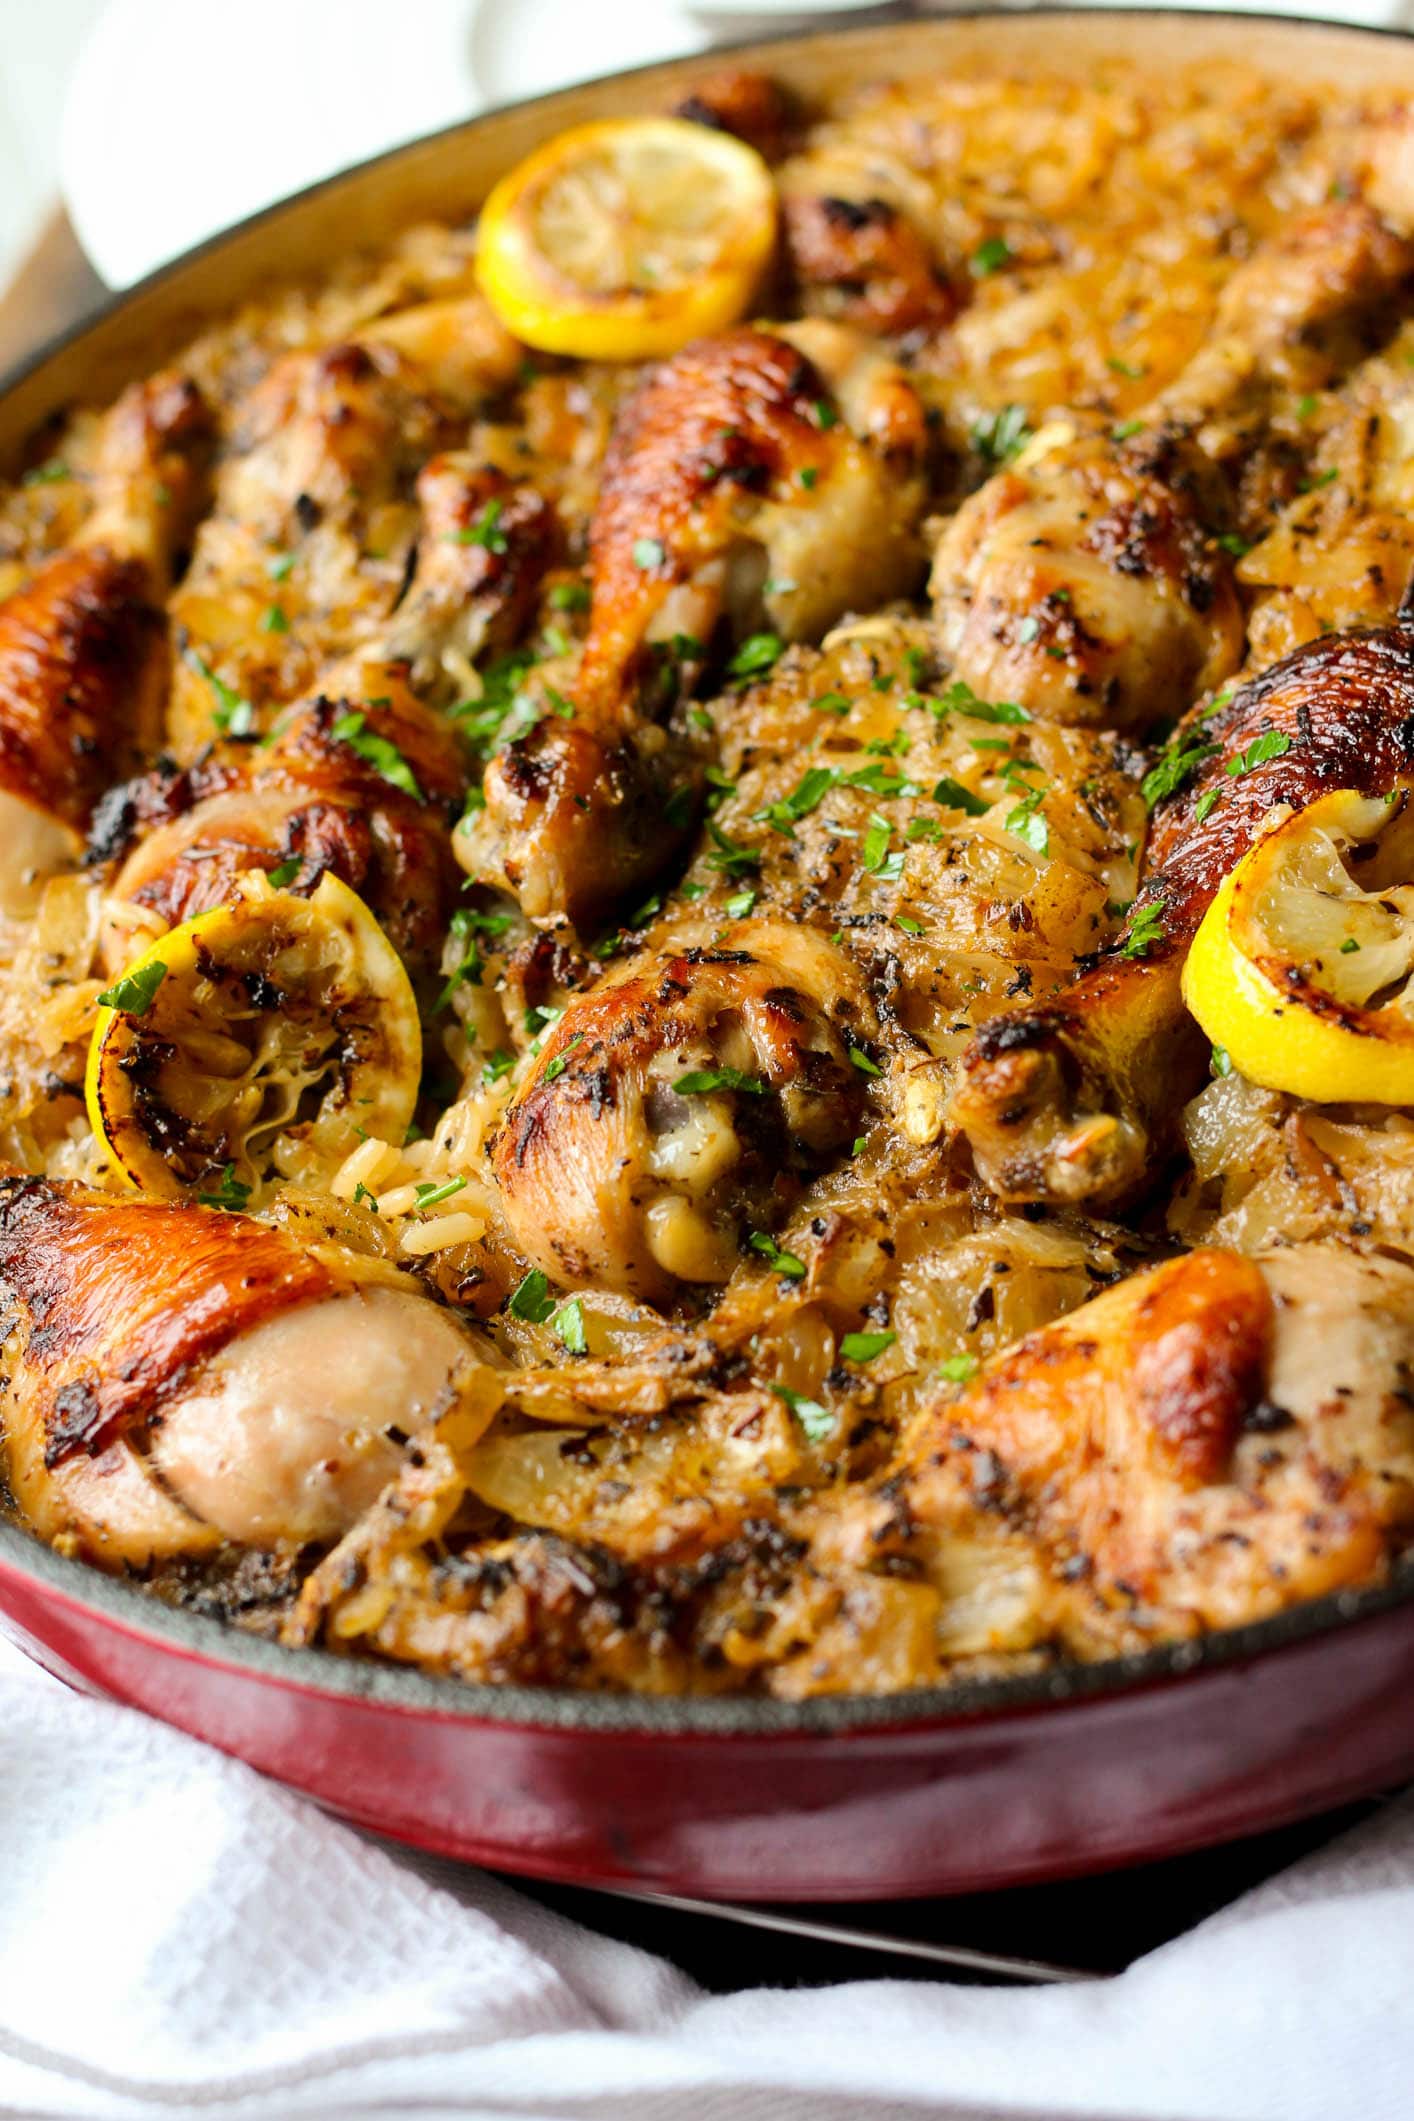 An incredibly easy and scrumptious chicken and rice dish made in just one pot!!!